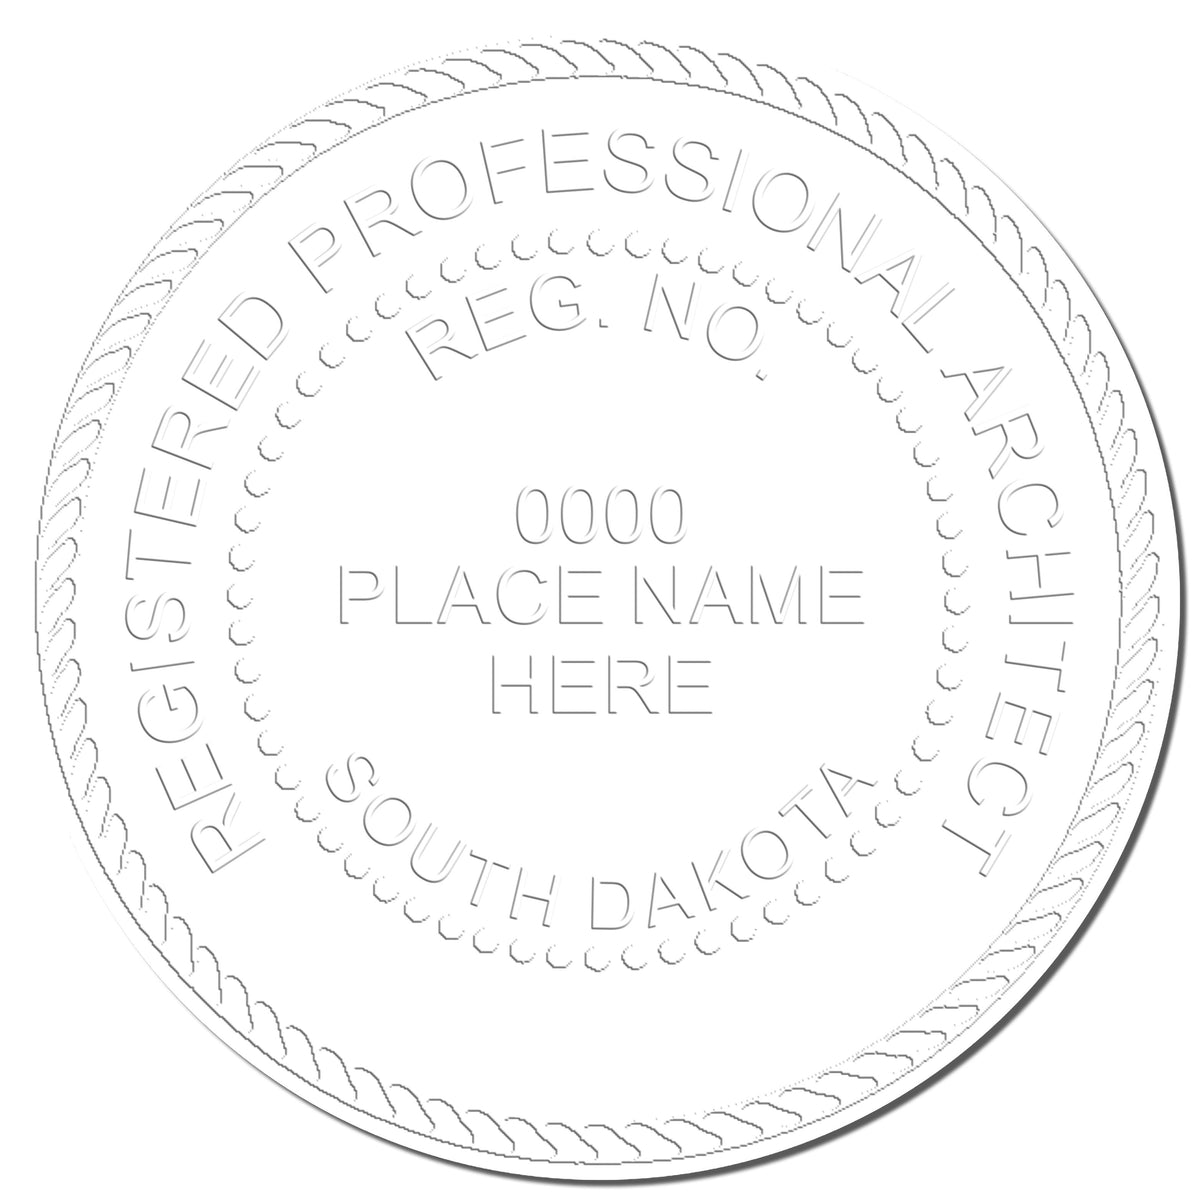 This paper is stamped with a sample imprint of the Gift South Dakota Architect Seal, signifying its quality and reliability.